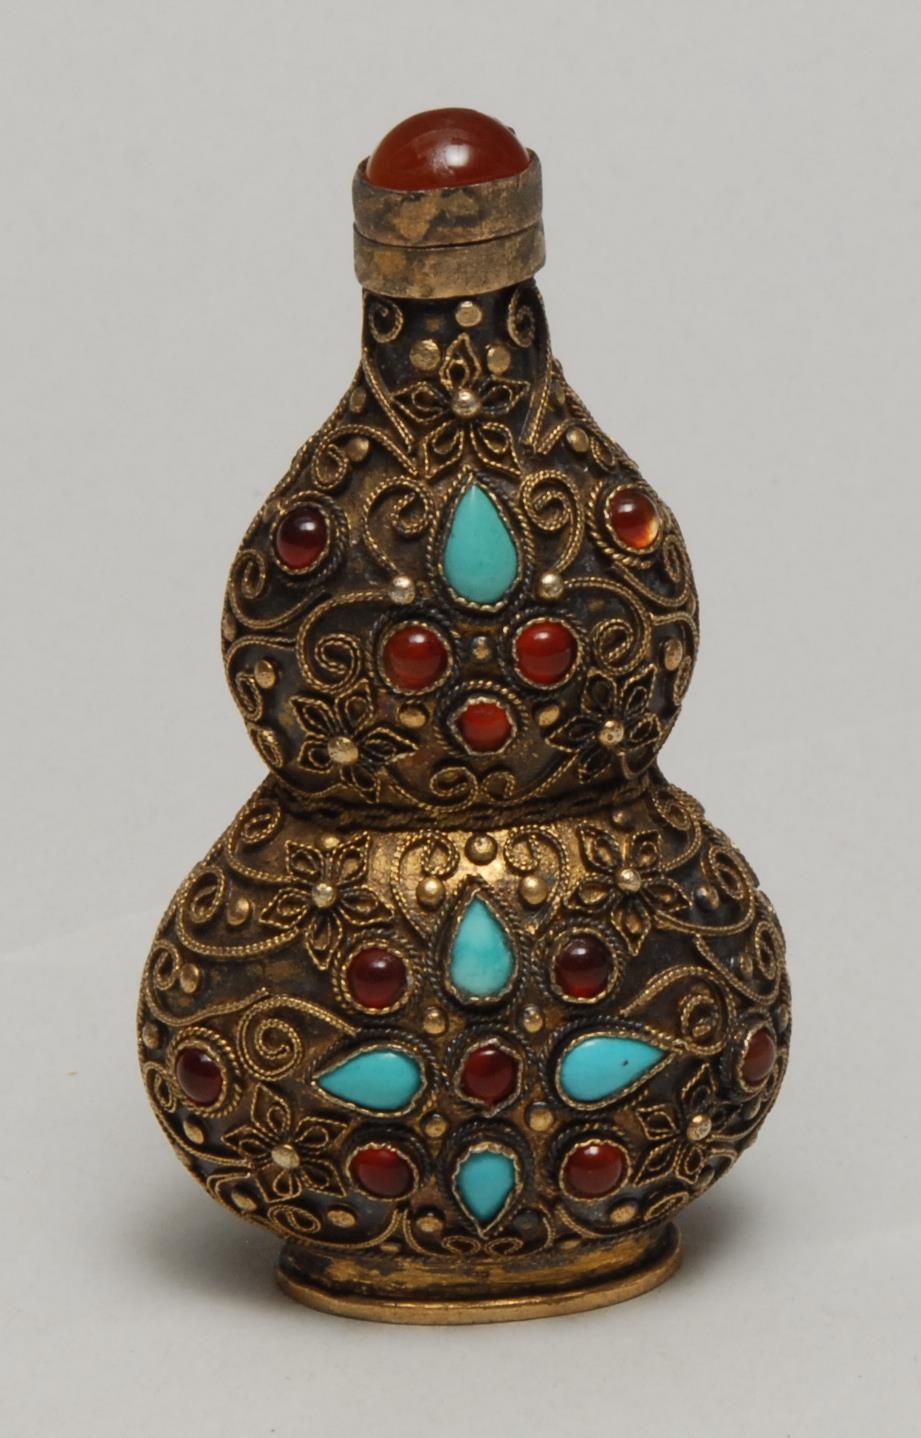 A Chinese silver gilt double gourd snuff bottle, applied with filigree and set with turquoise and